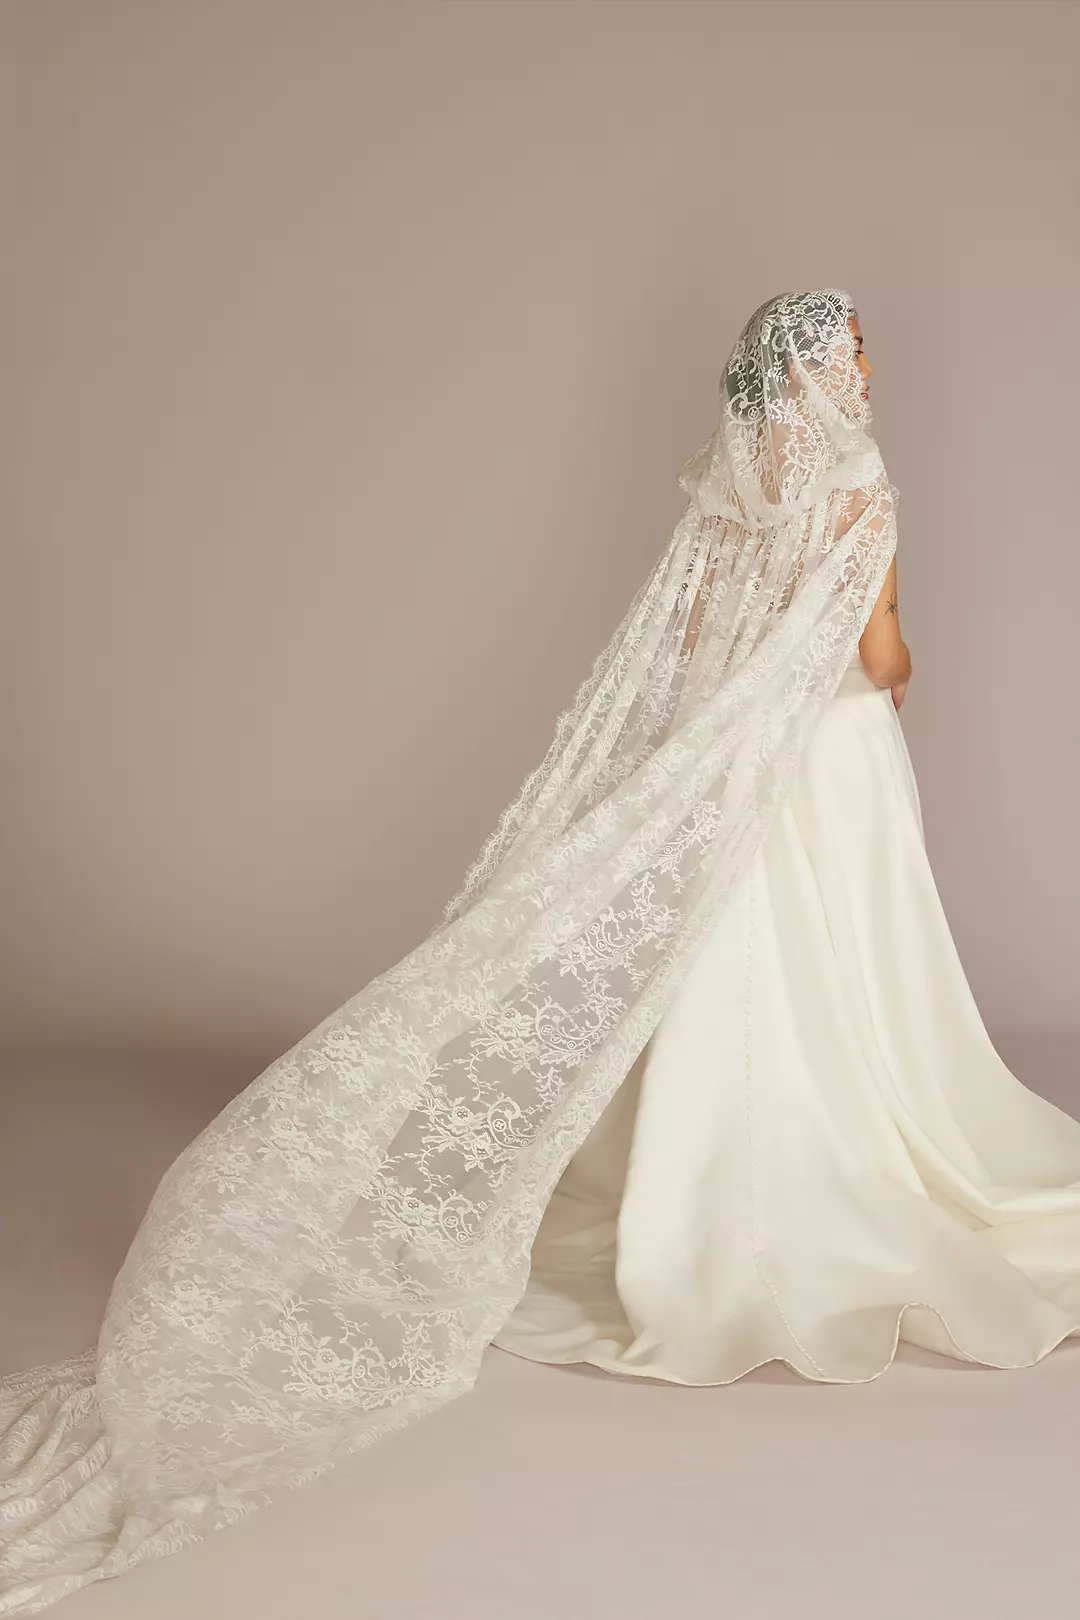 Lace Hooded Bridal Cape Image 2